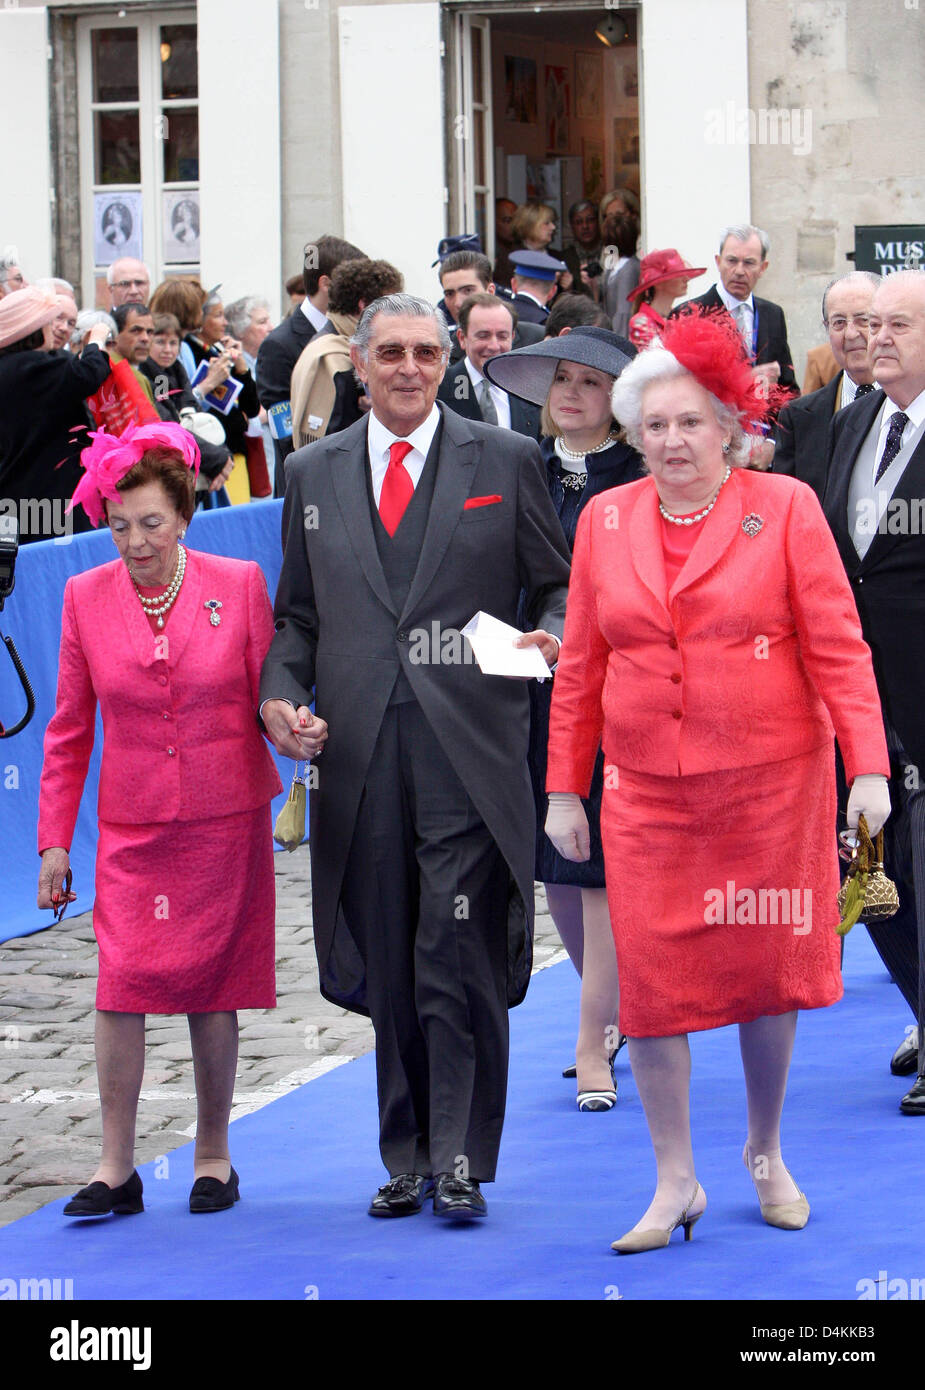 Infanta Pilar of Spain (R), sister of King Juan Carlos, attends the church wedding of Prince Jean d?Orleans and Princess Philomena, Duke and Duchess of Vendome, at the Cathredral of Senlis, France, 2 May 2009.  Photo: Albert Nieboer (NETHERLANDS OUT) Stock Photo